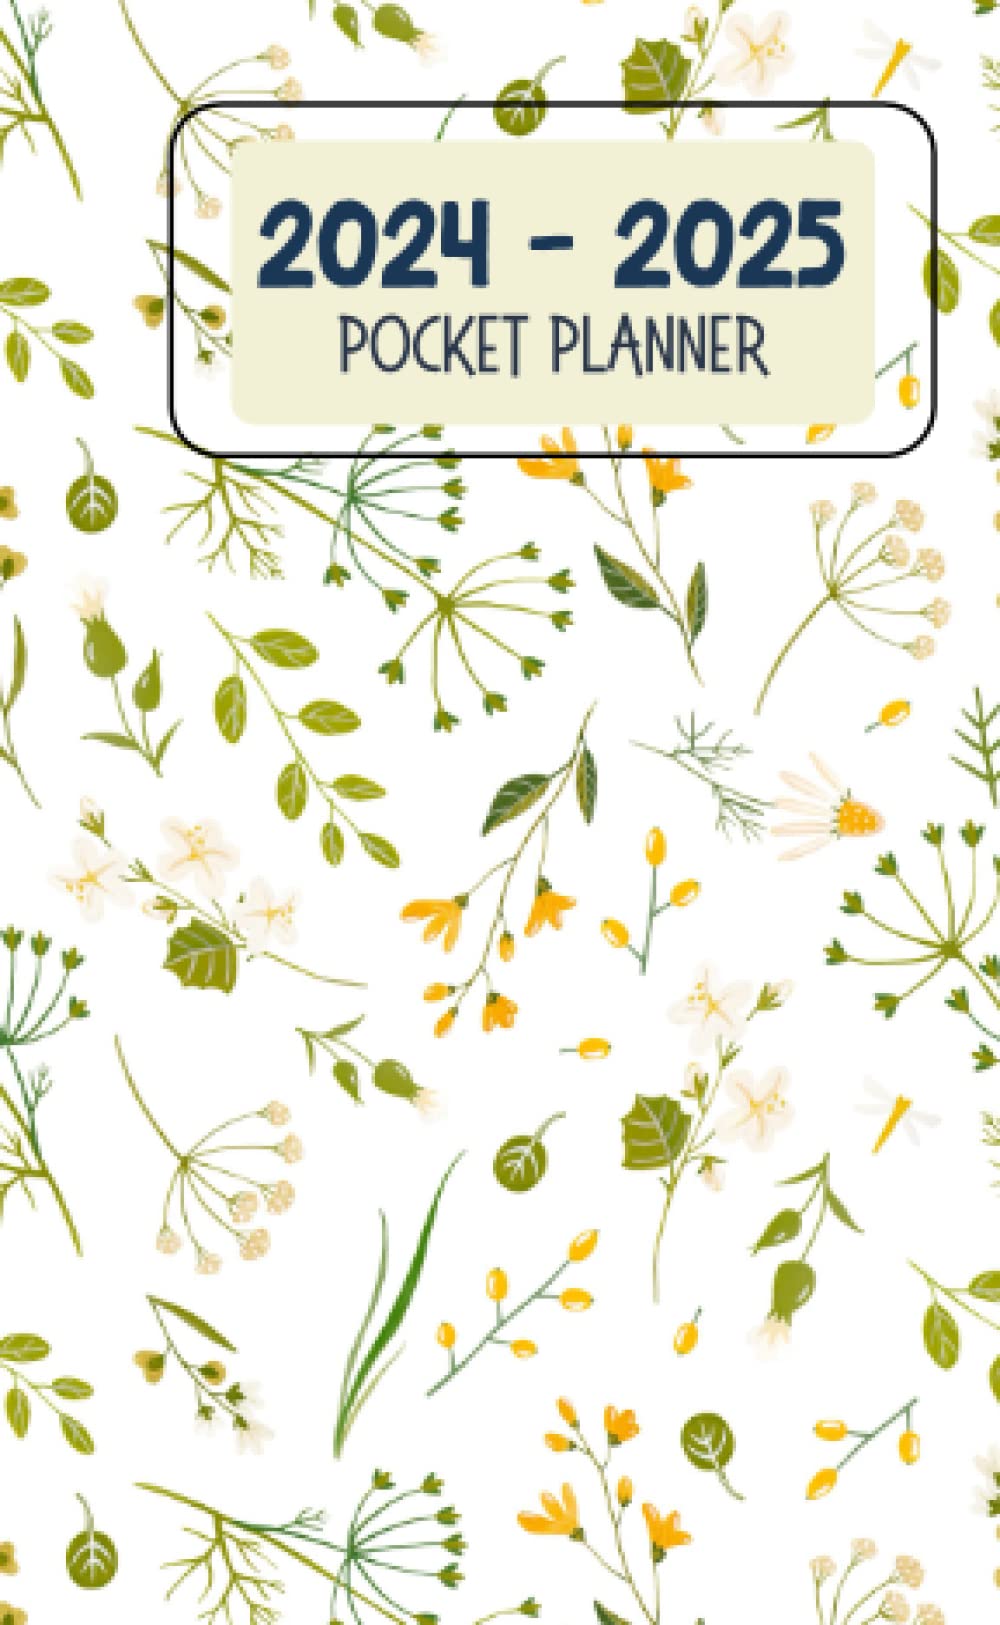 2024-2025 pocket planner: 2 Year Monthly Pocket Calendar (Junuary 2024 to December 2025) With Federal Holidays and Motivational Quotes